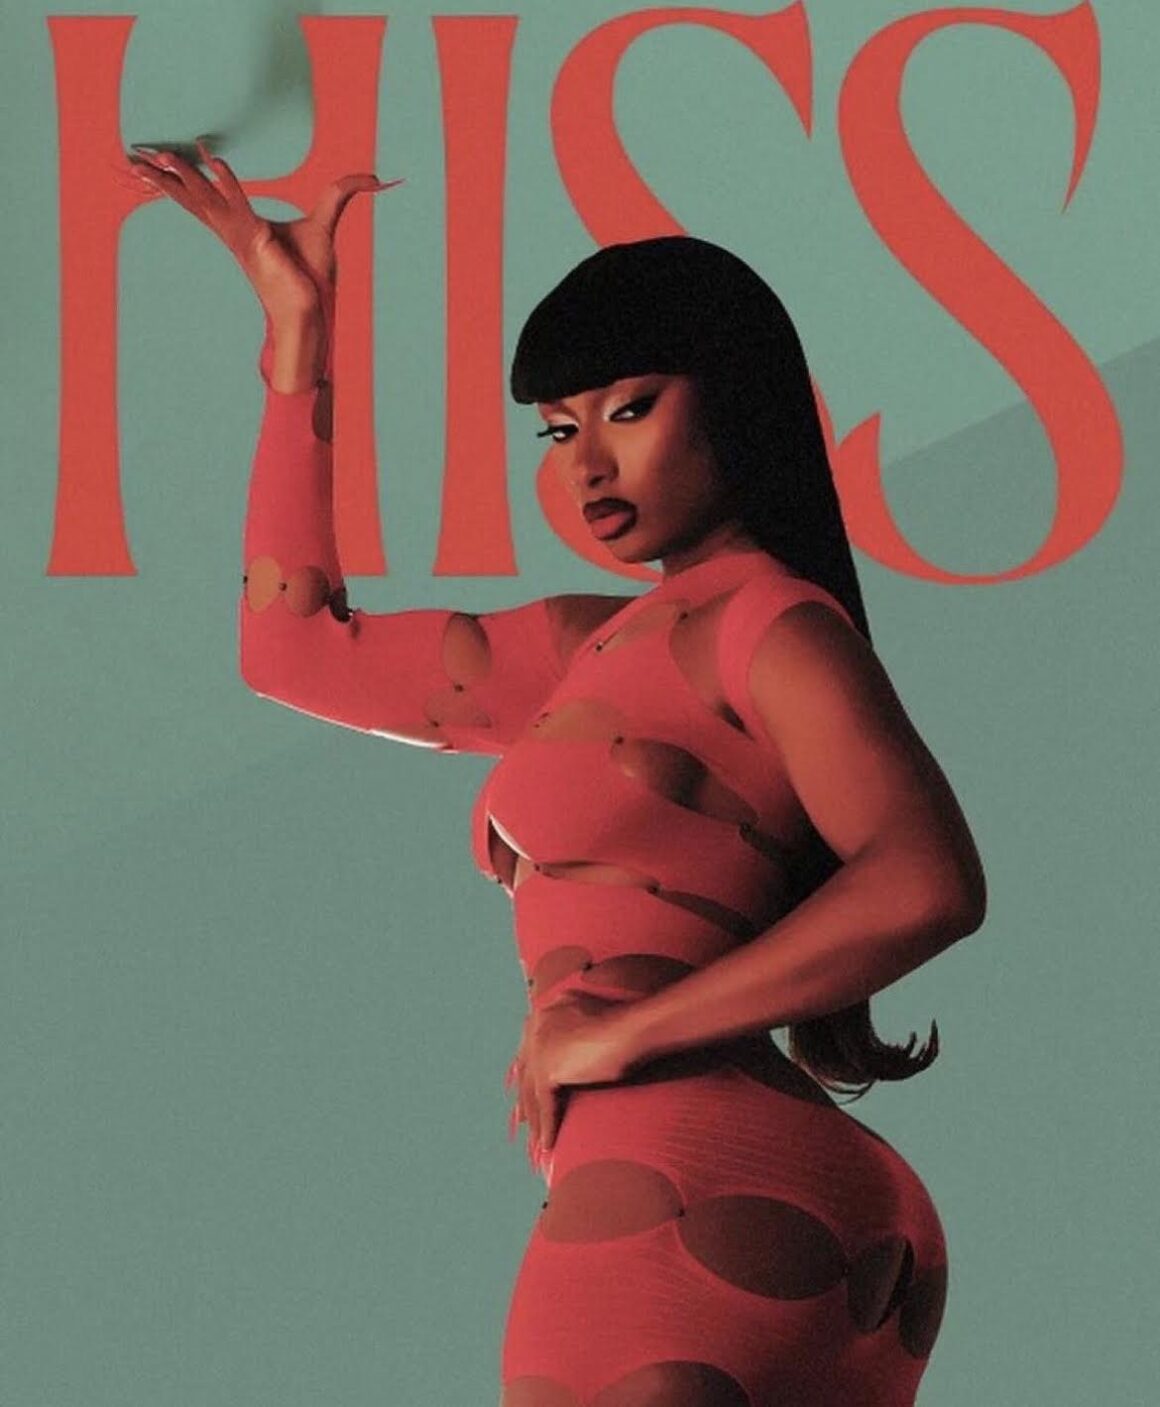 Fashion Bomb Music Video Megan Thee Stallion Released Her Song HISS with Designs by Natalia Fedner Matthew Reisman Buerlangma More 2